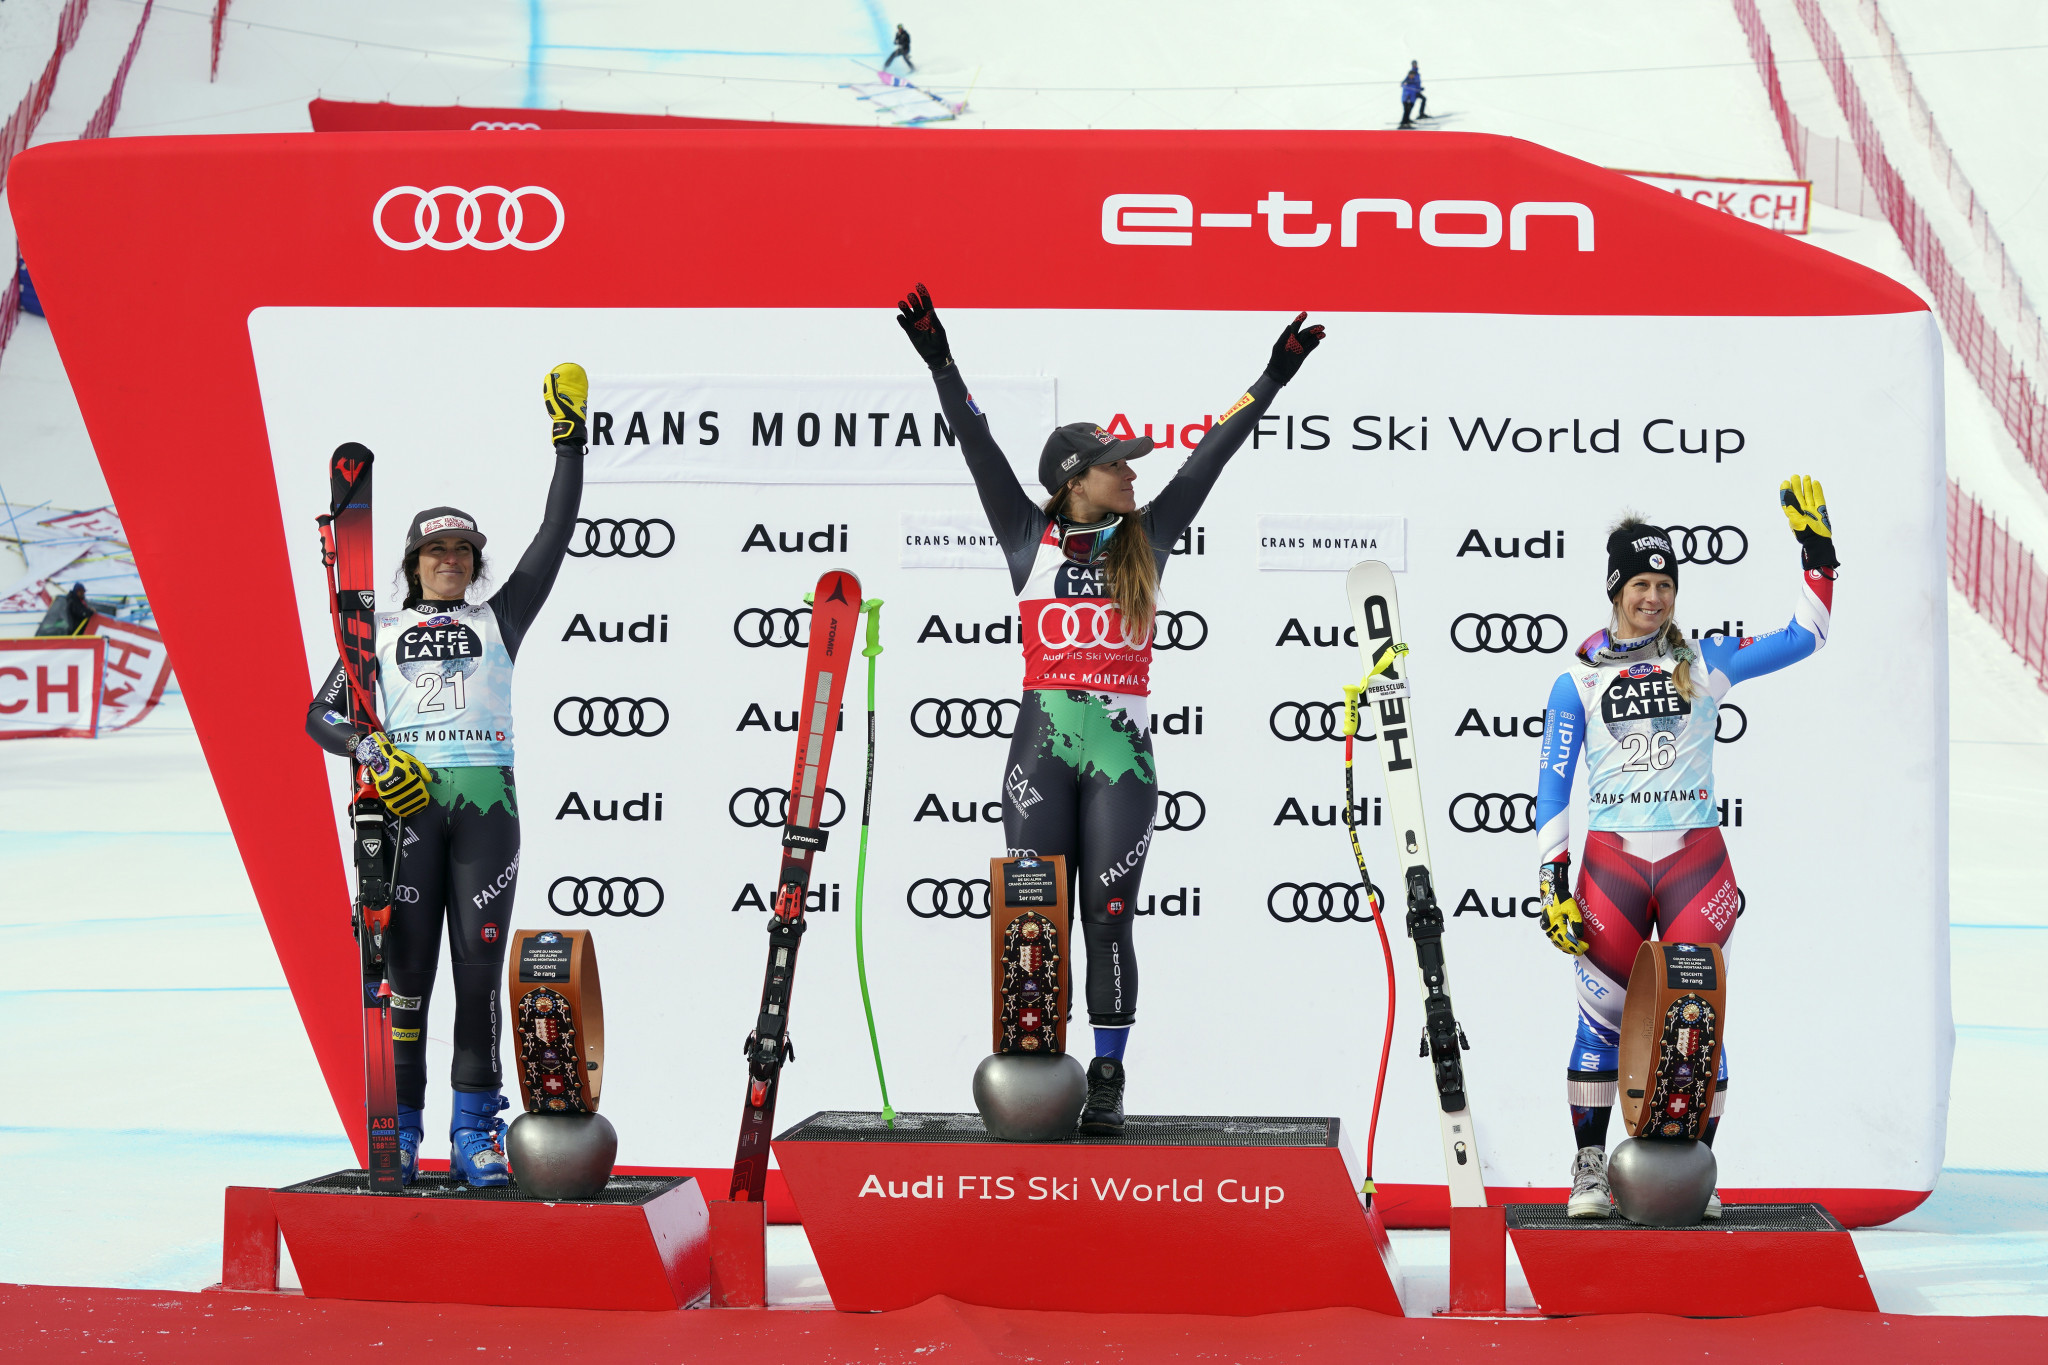 Goggia becomes first Italian woman to win 22 Alpine Skiing World Cup races with victory in rescheduled downhill at Crans-Montana